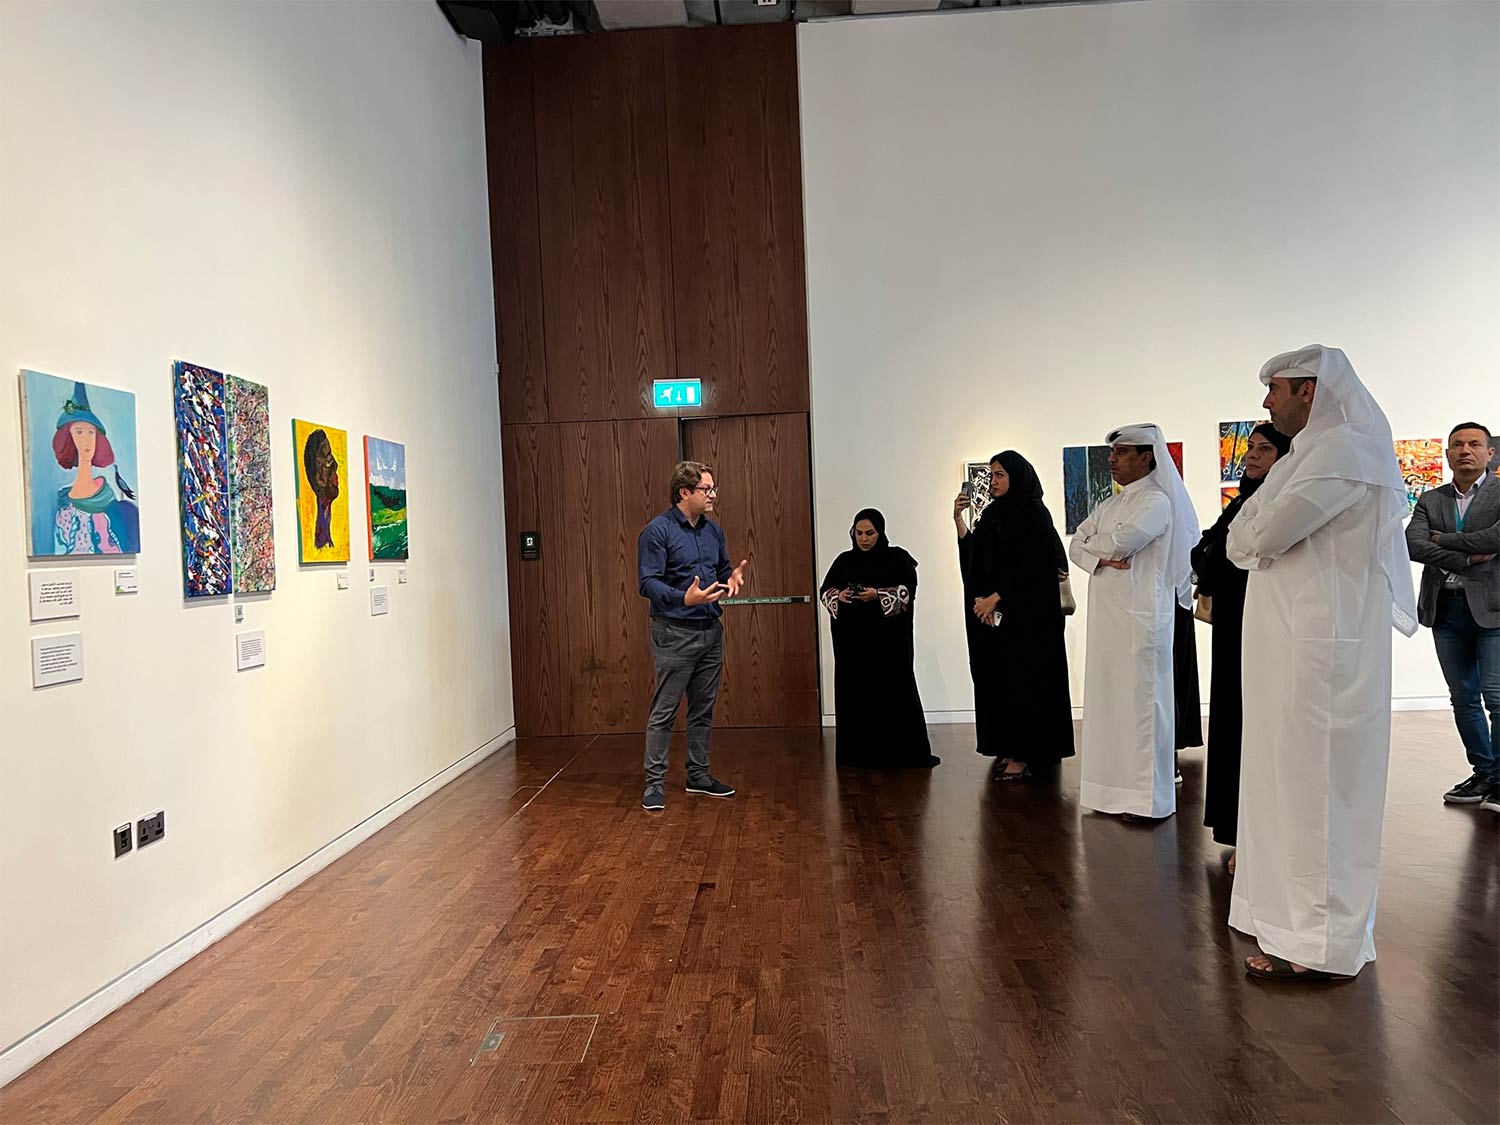 Msheireb Museums hosts “Recovery Road” Exhibition in collaboration with Naufar